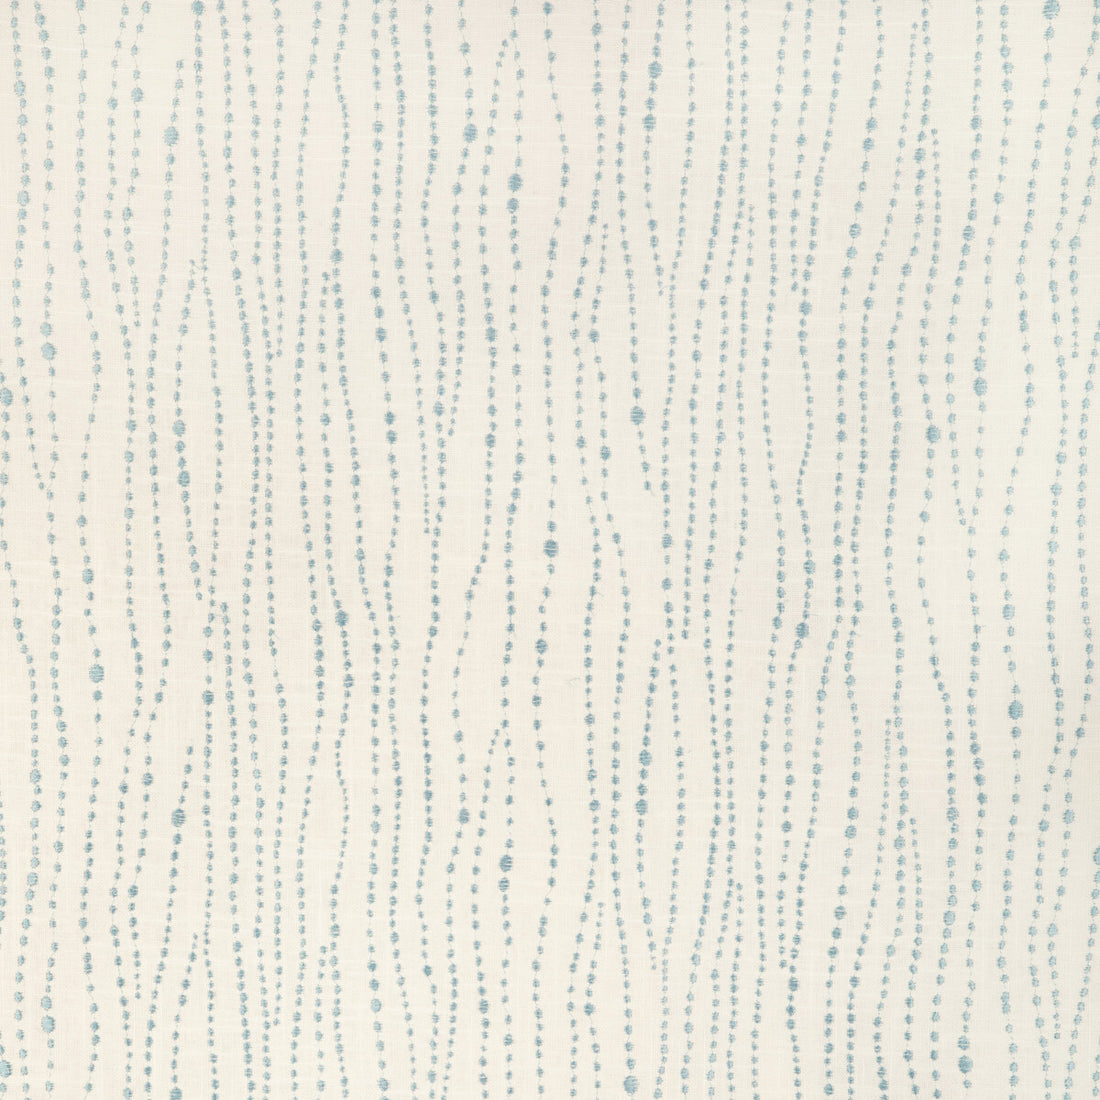 Denali fabric in lagoon color - pattern 4192.505.0 - by Kravet Design in the Candice Olson collection